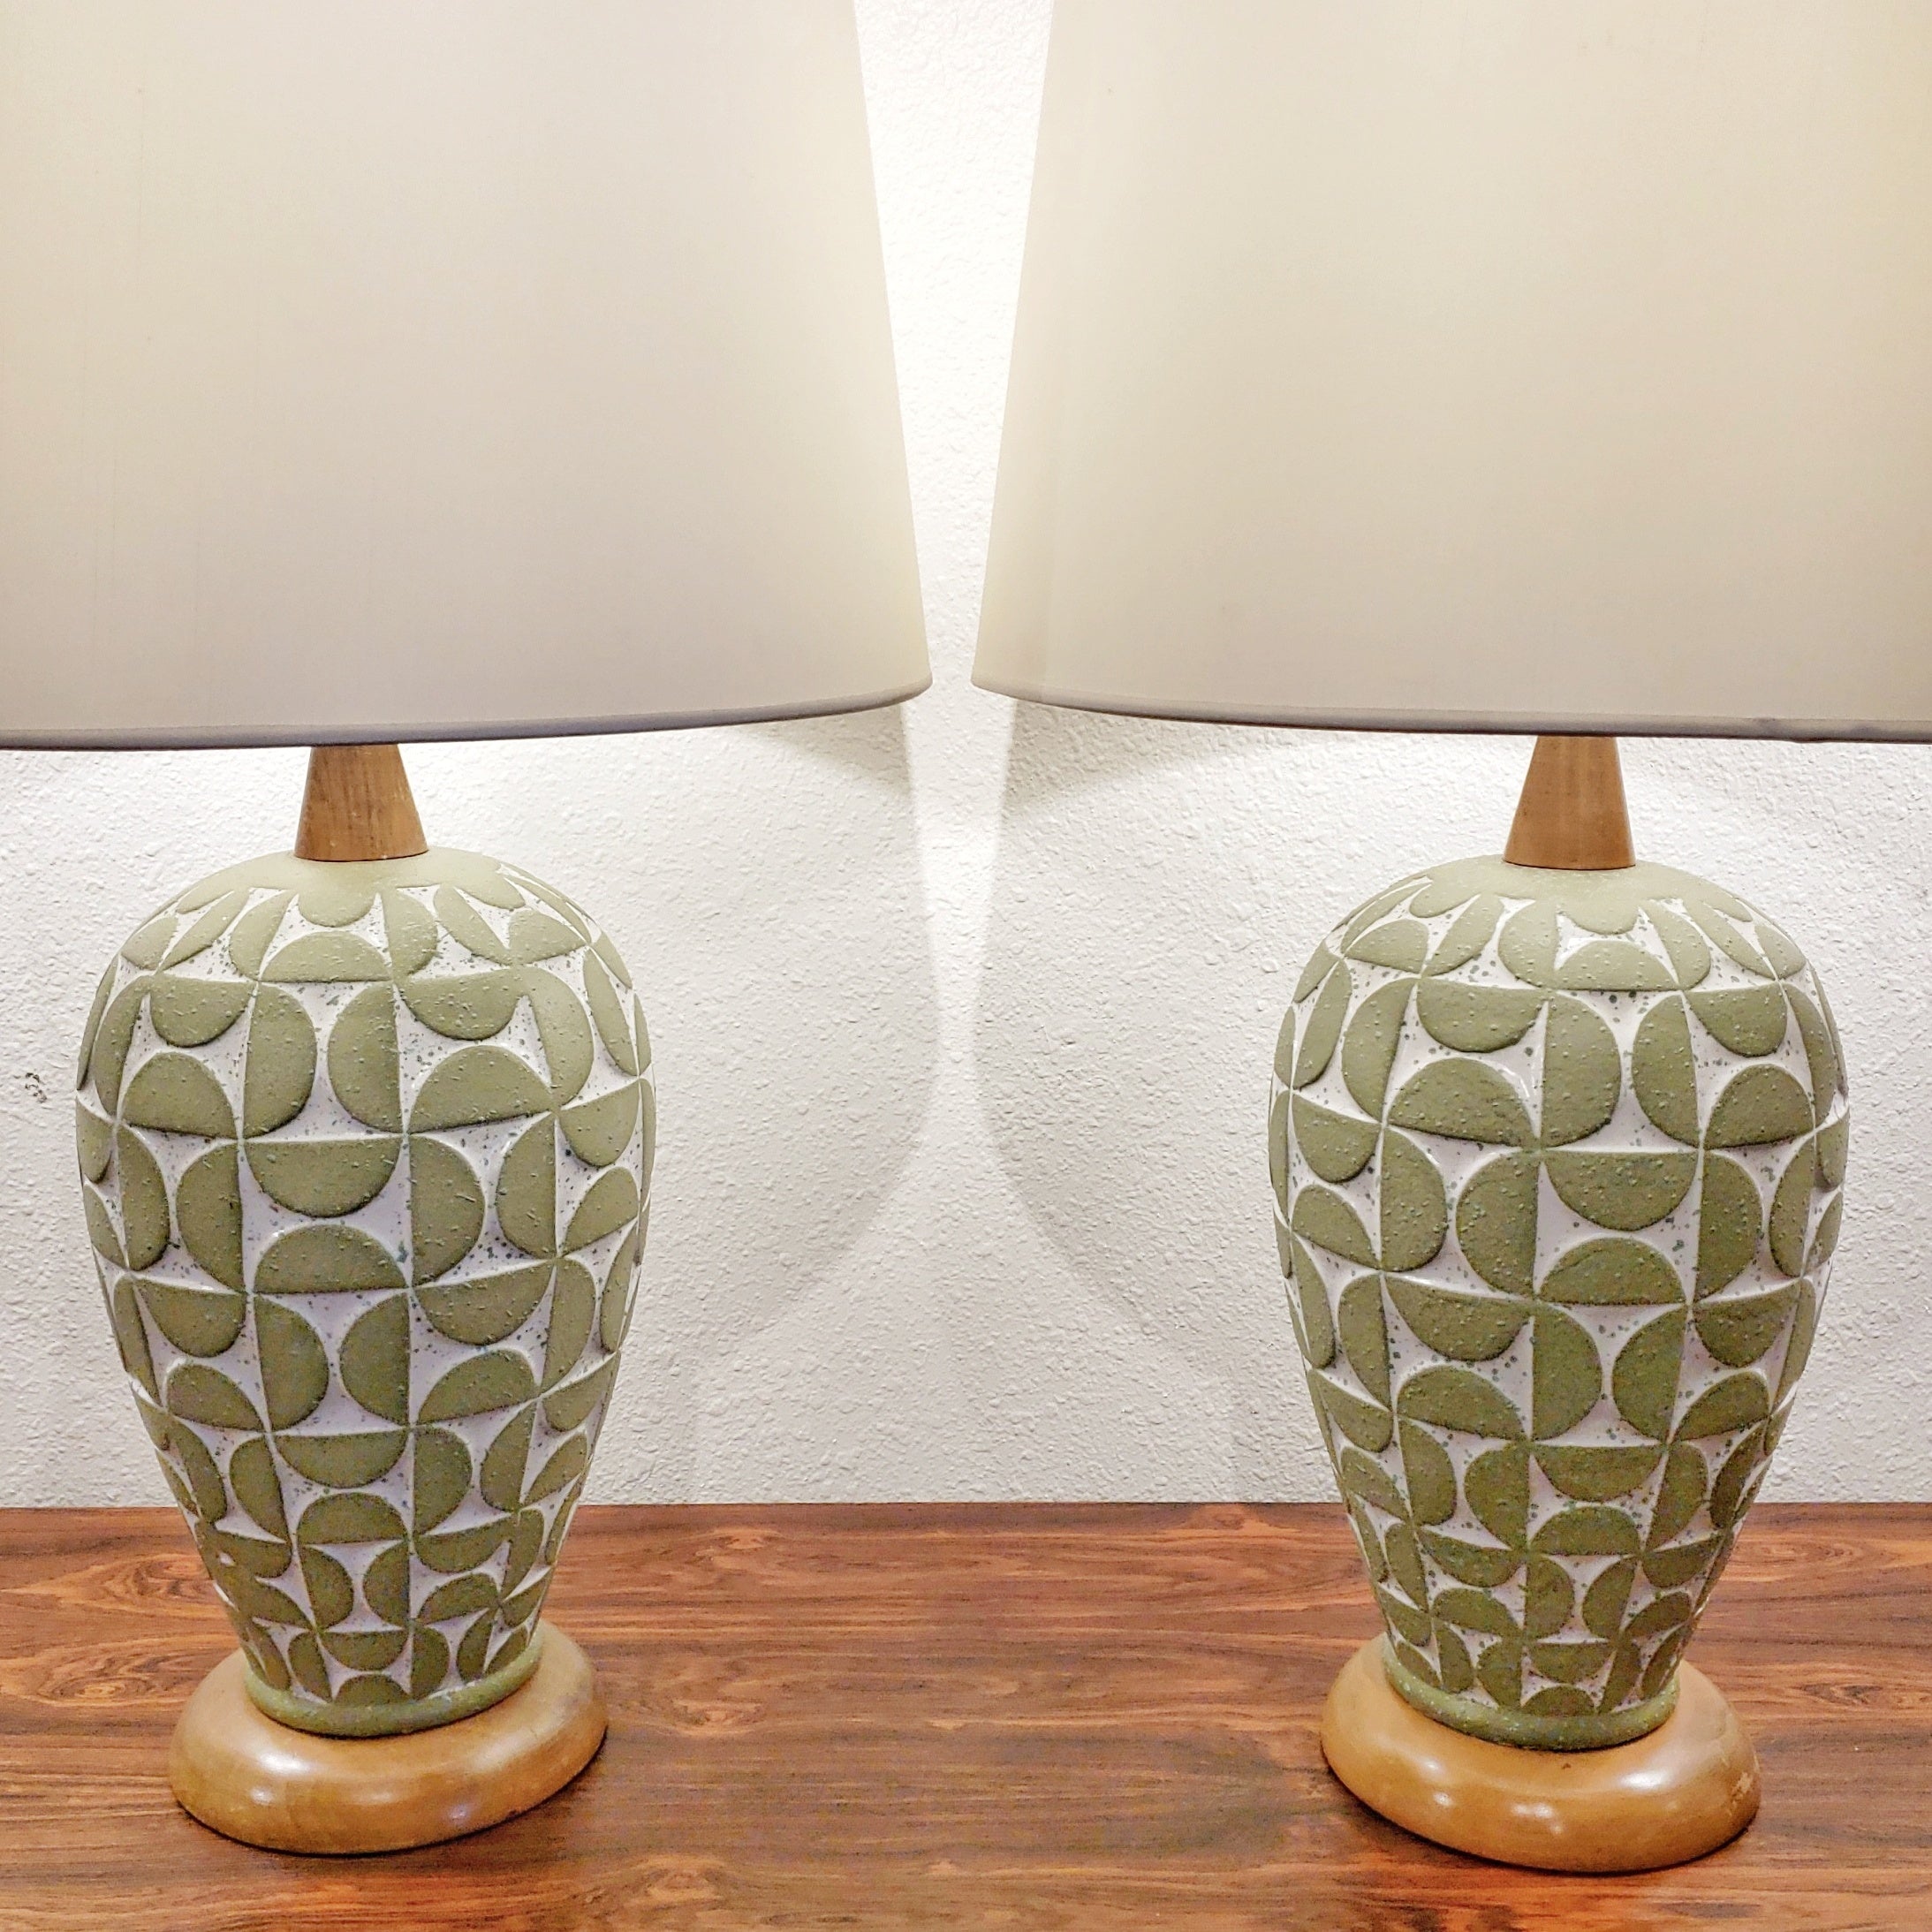 1960s SCULPTED GEOMETRIC RELIEF TABLE LAMPS